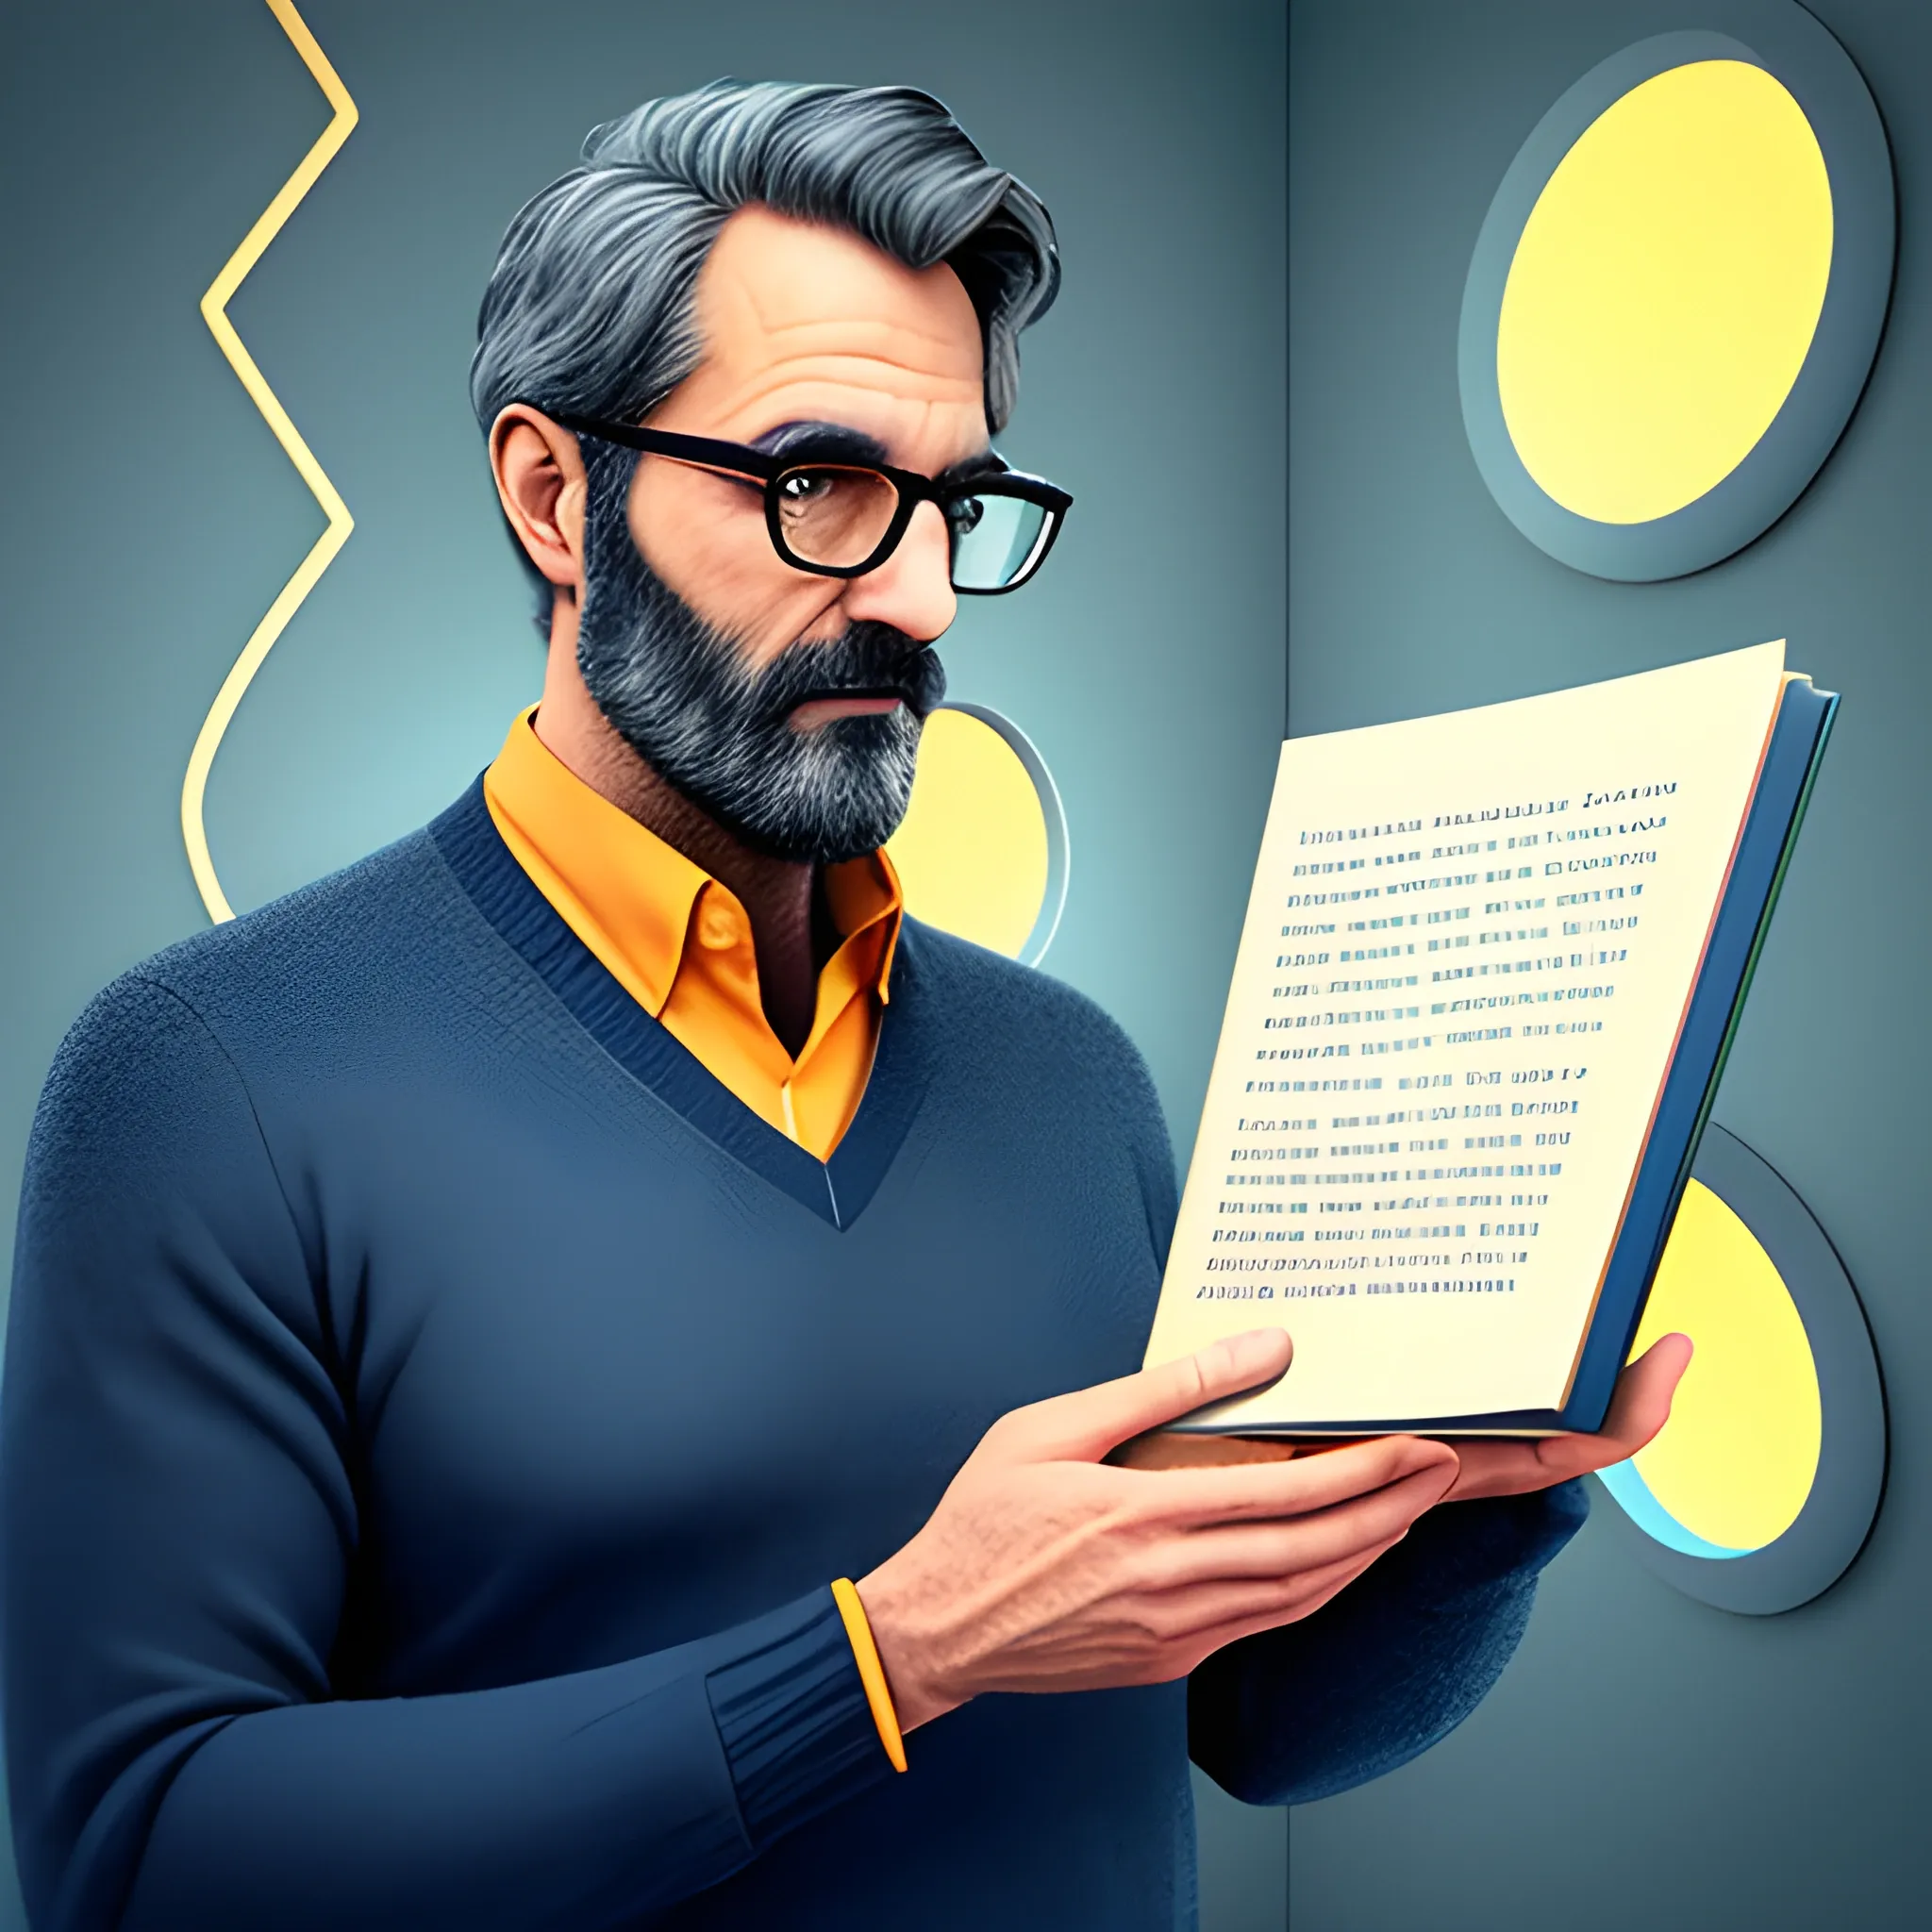 It generates a hyper-realistic image of a school classroom with golden sunset light filtering through the window. In the center of the room, visualize a very young teacher and round reading glasses, wearing a dark blue wool sweater and gray cloth pants. This professor is holding an old hardcover book with numerous colorful sticky notes protruding from the pages. In front of him is a holographic representation in shades of blue of ChatGPT, visualized as floating lines and curves forming a human face in the midst of detailed explanation